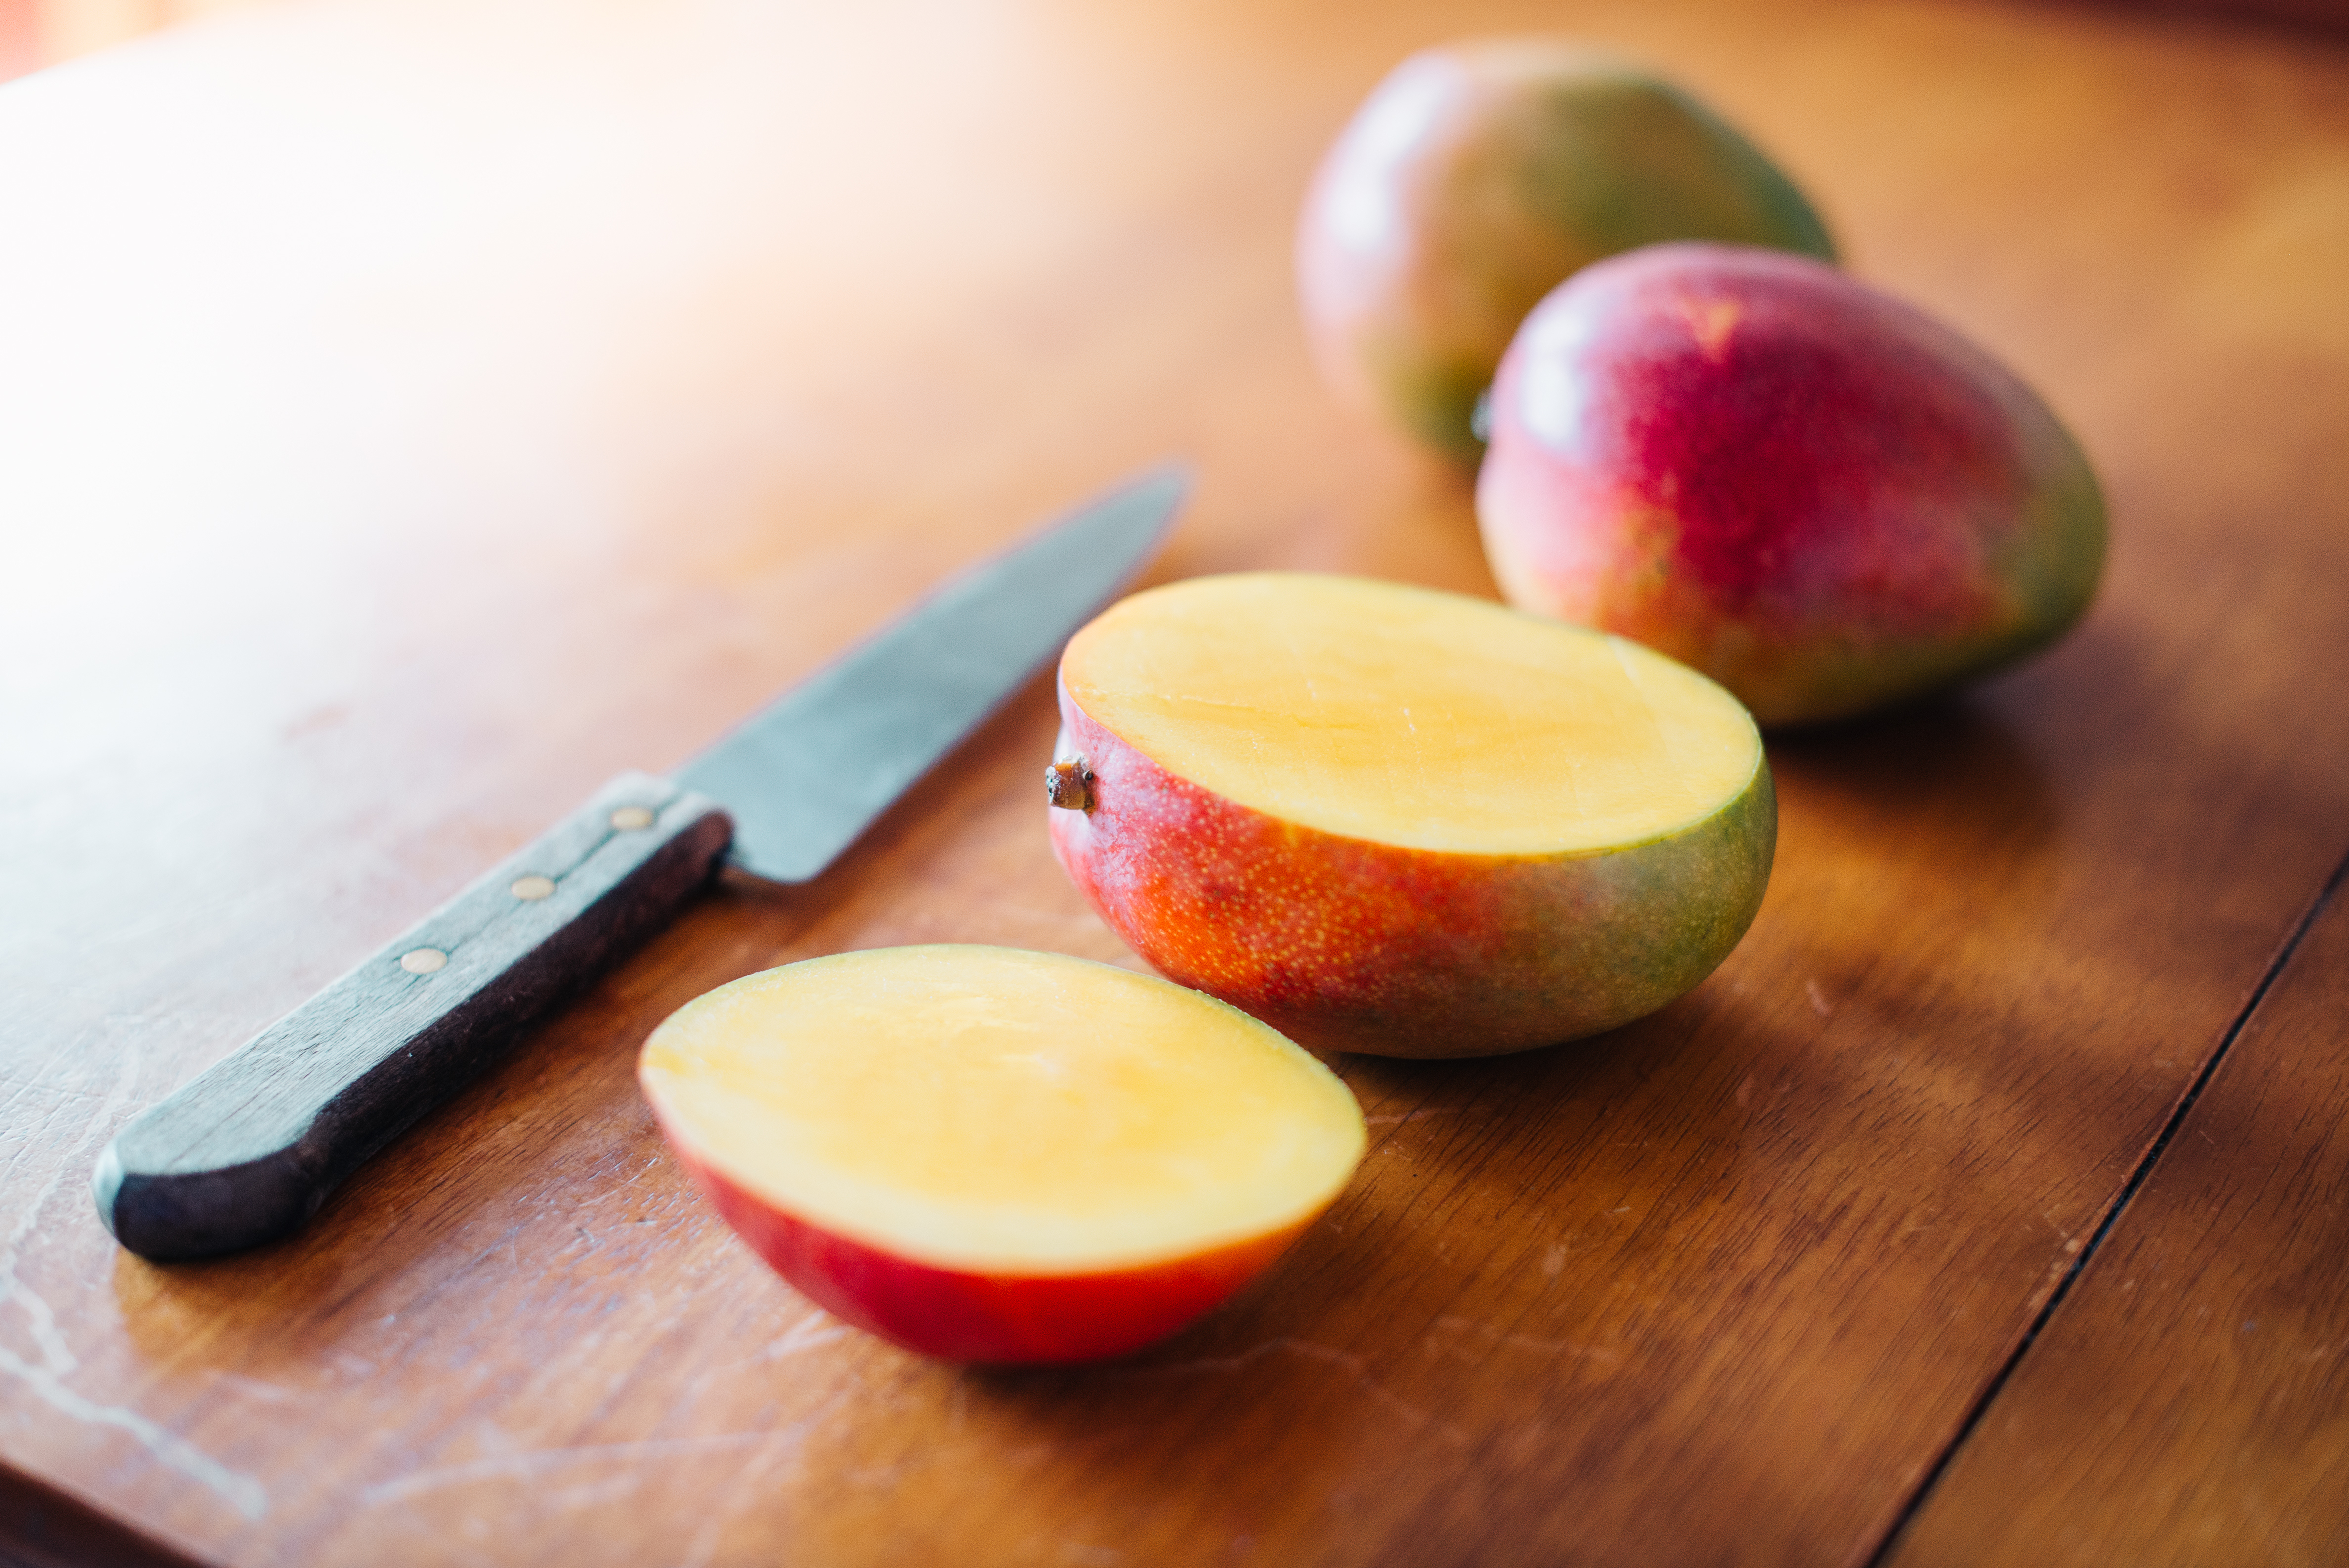 How to Eat Mango Seeds, According to a Dietitian